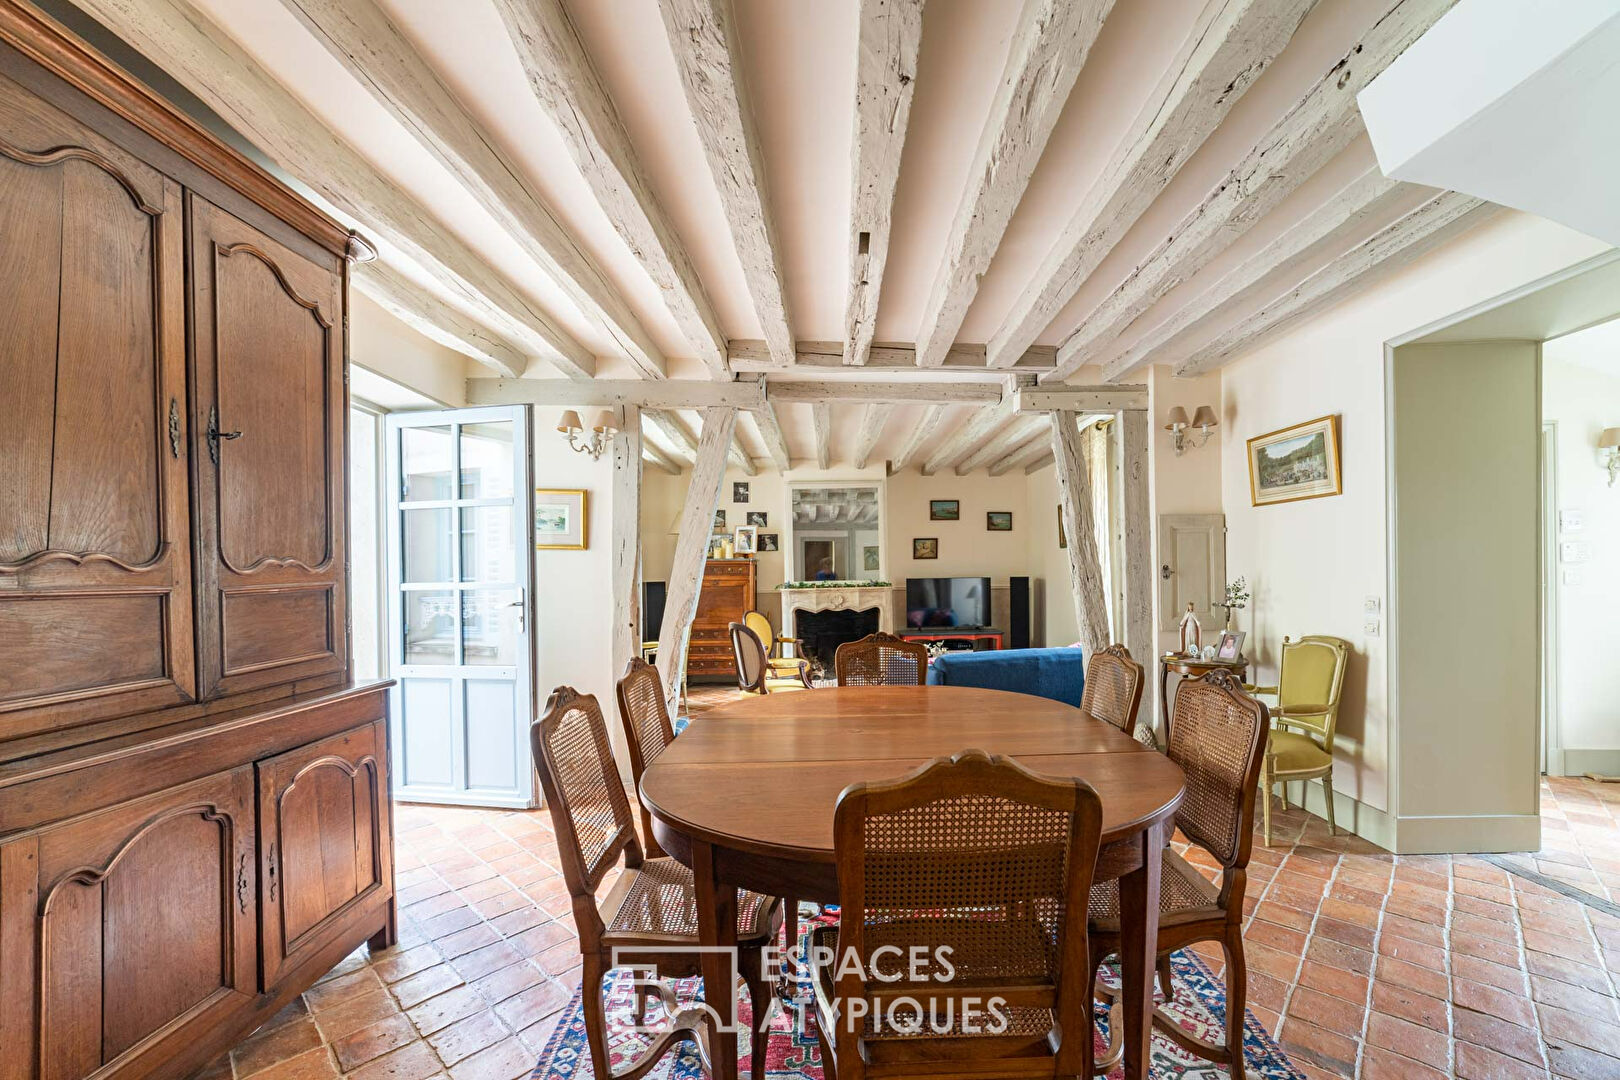 Family house with garden in the heart of the historic center of Verneuil sur Seine